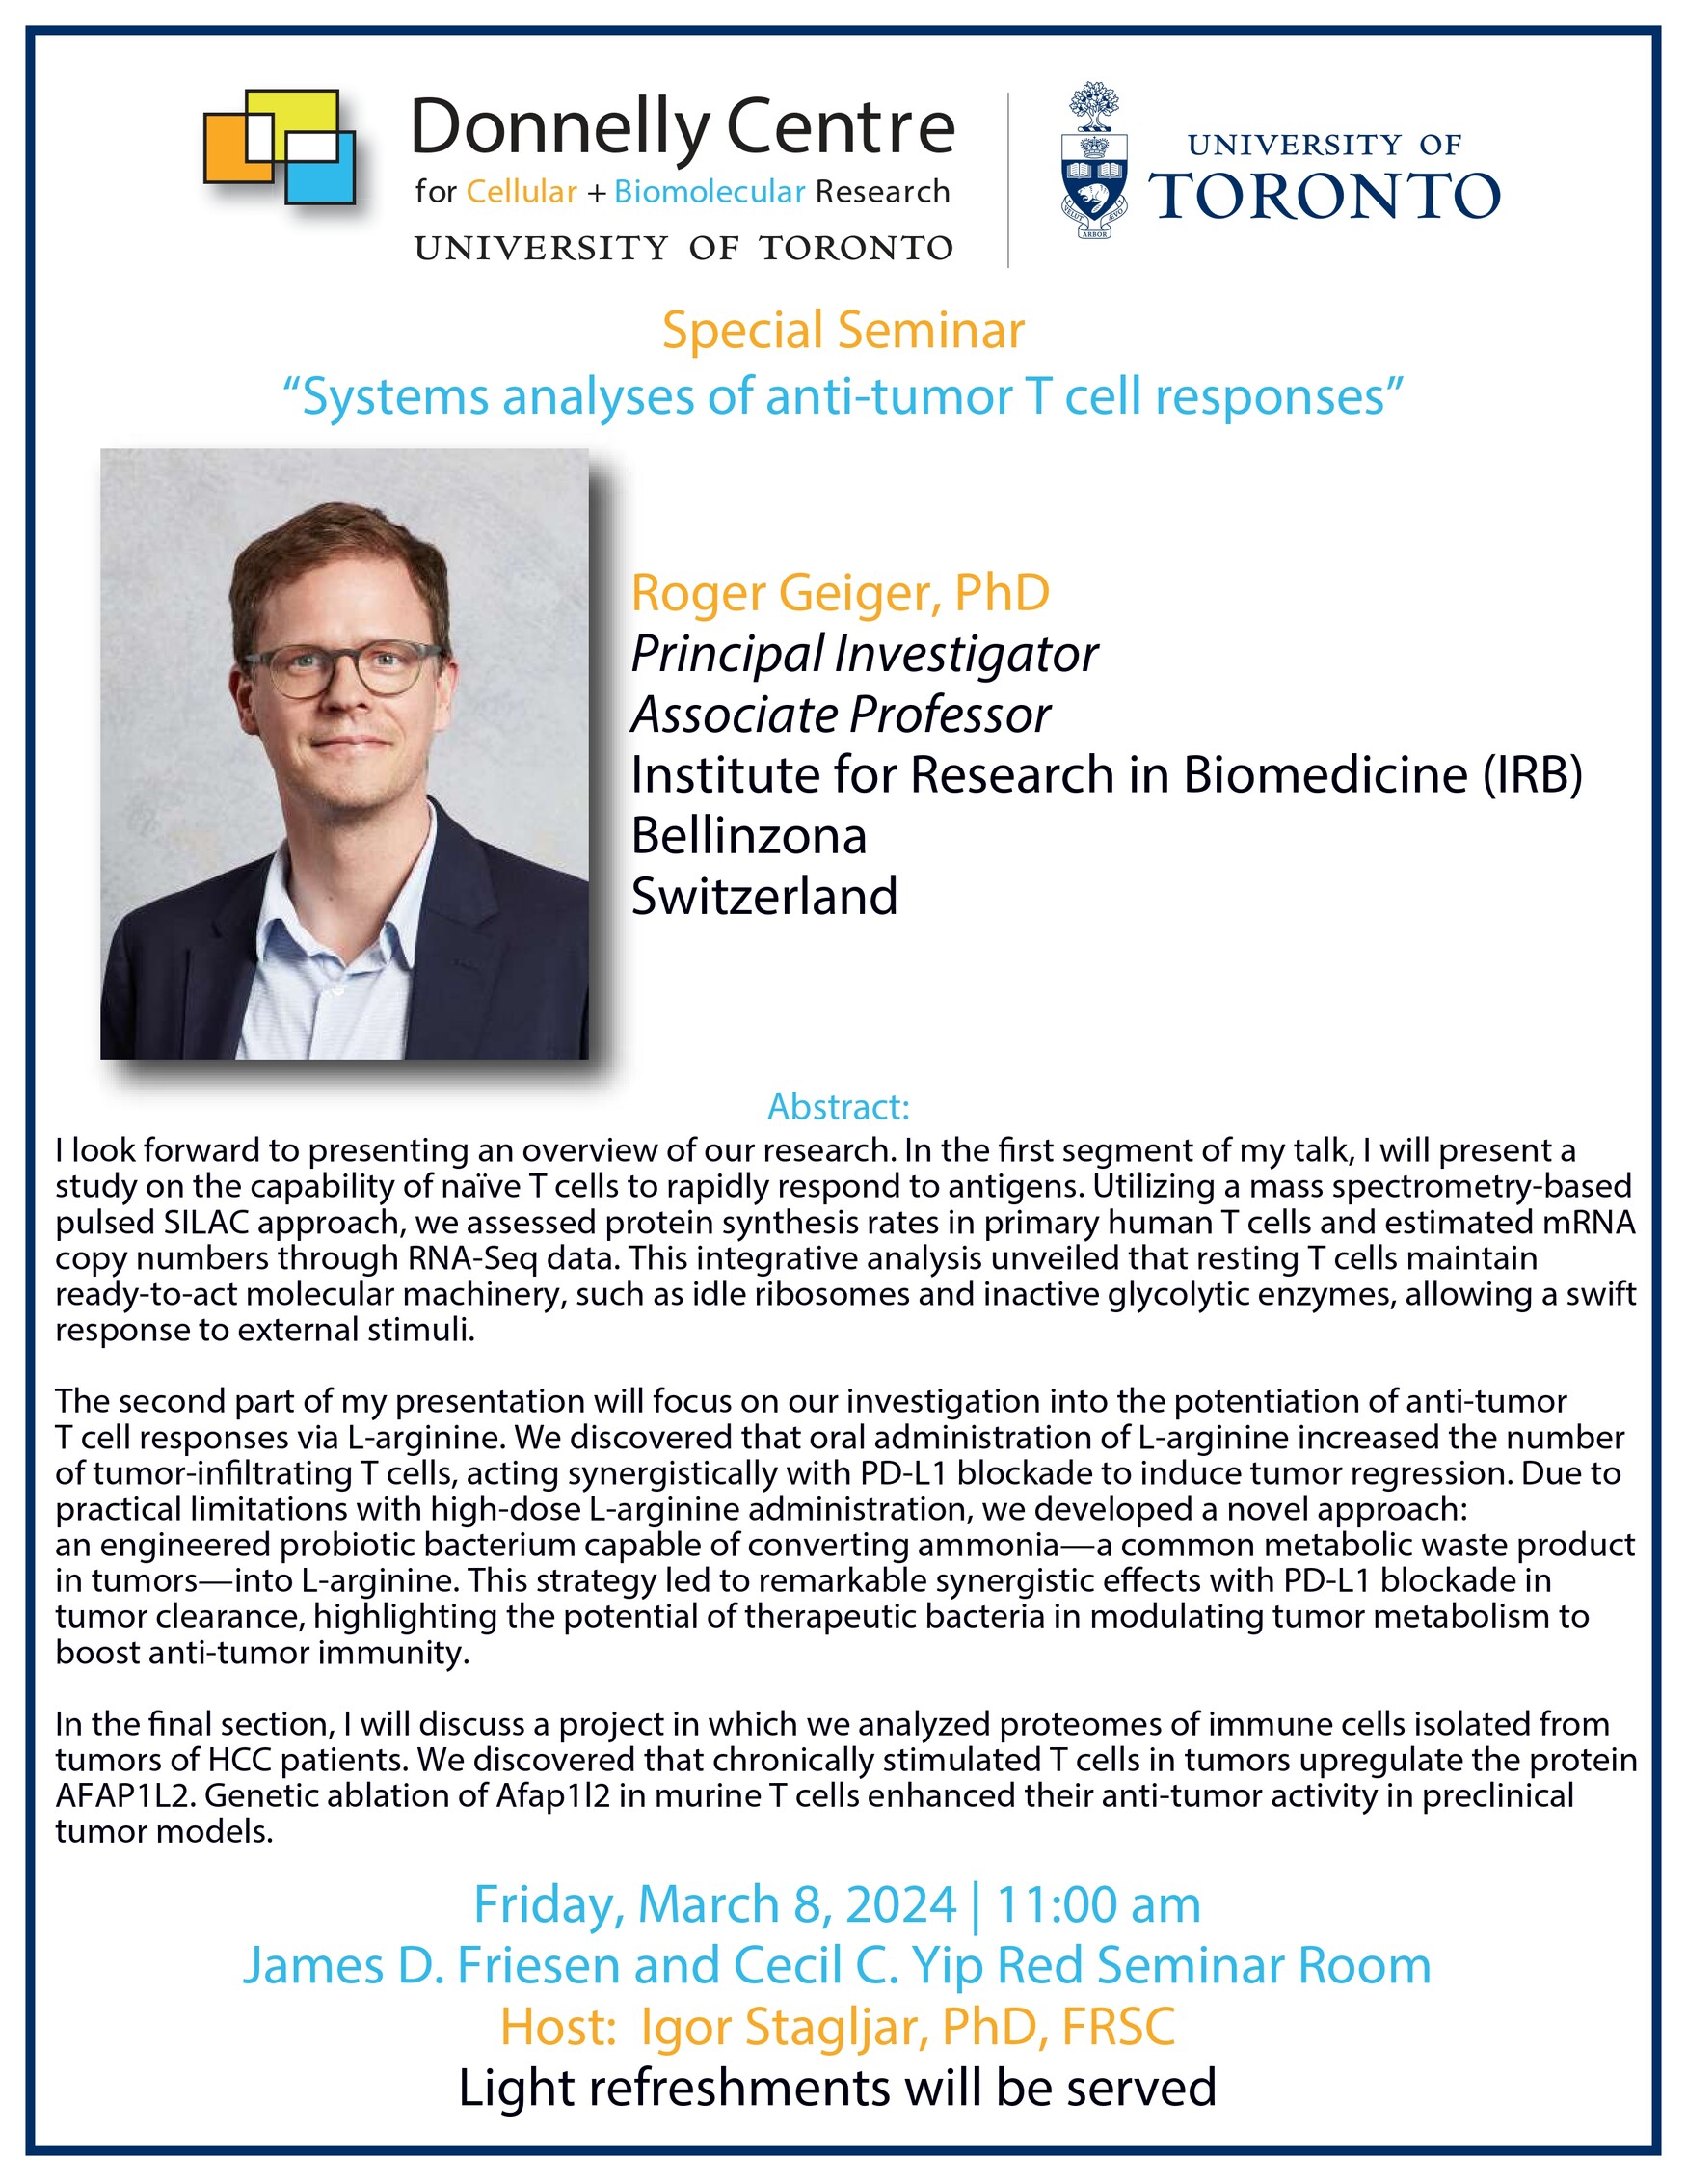 Poster for Donnelly Centre Seminar on "Systems analyses of anti-tumour T cell responses"